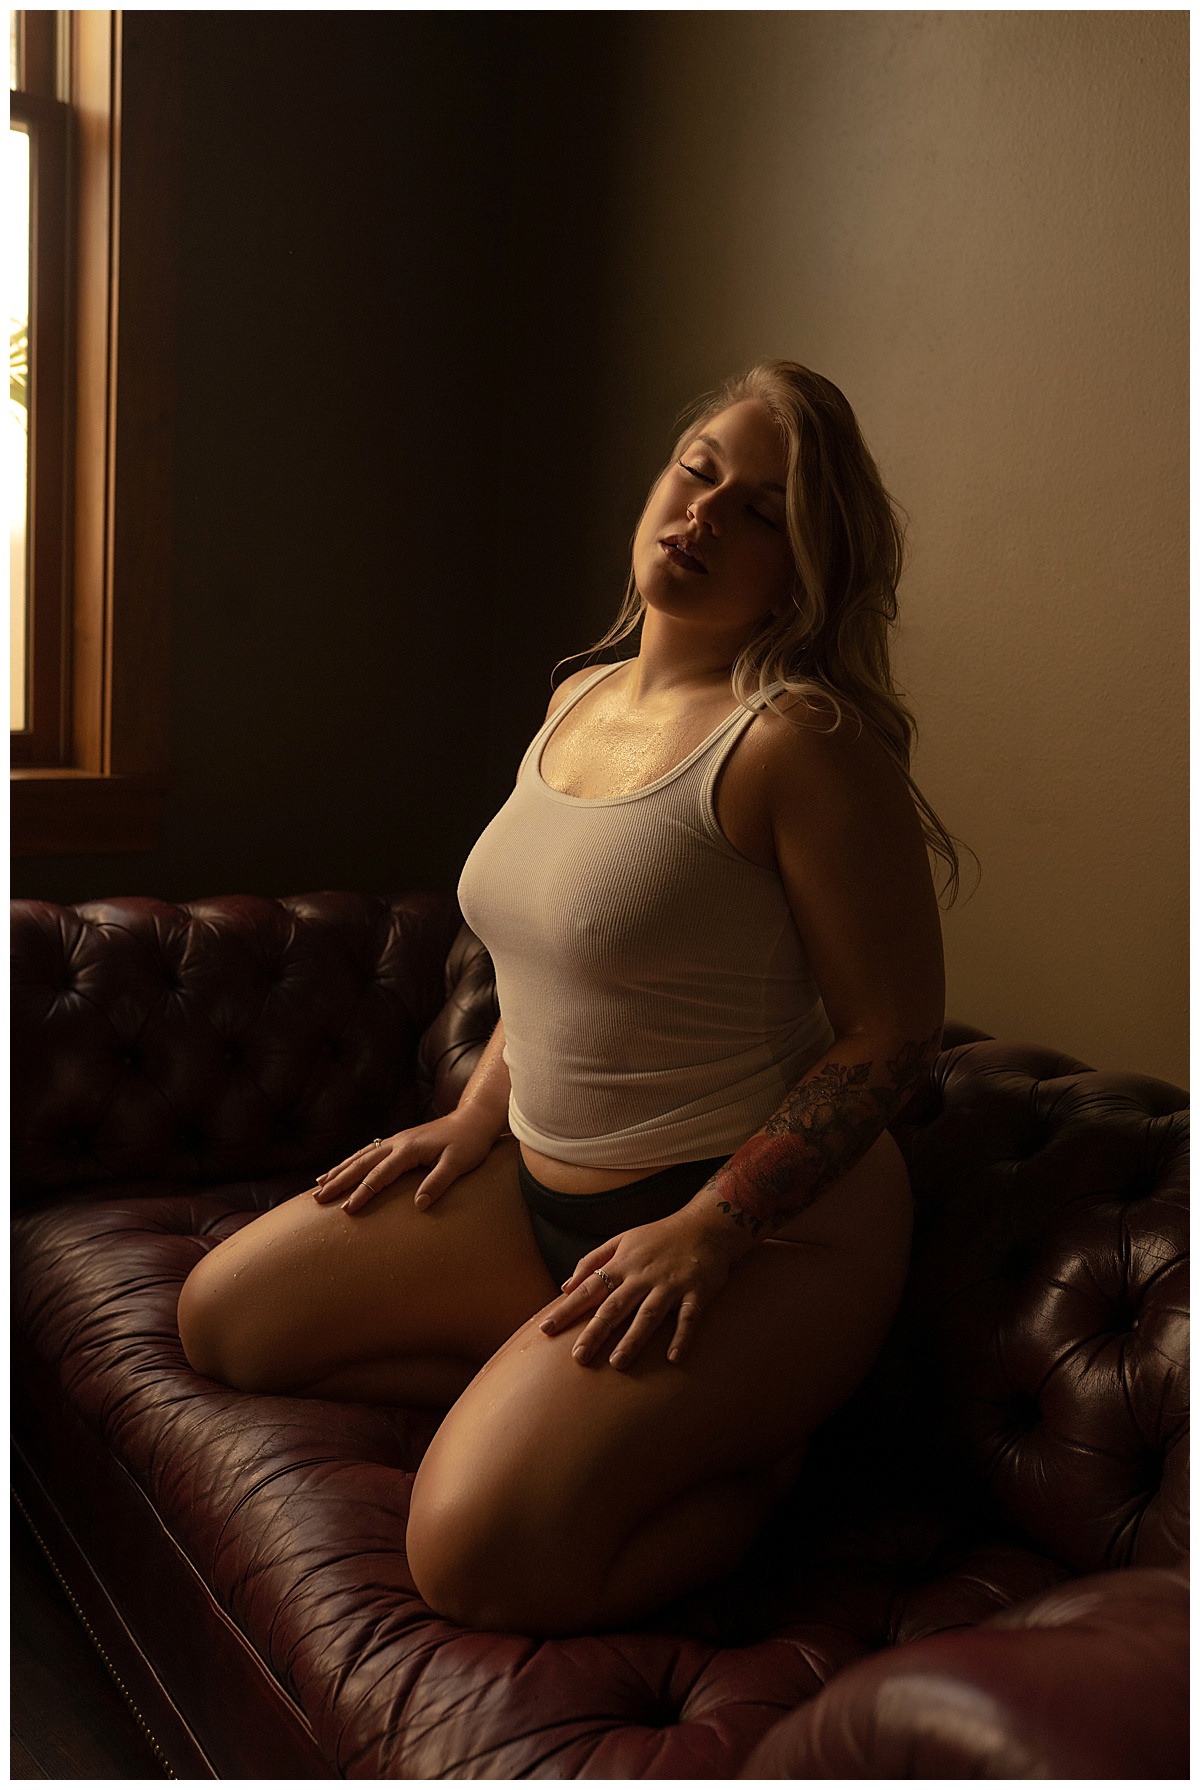 Female kneels down wearing a white t-shirt after following tips to do Before Your Boudoir Session